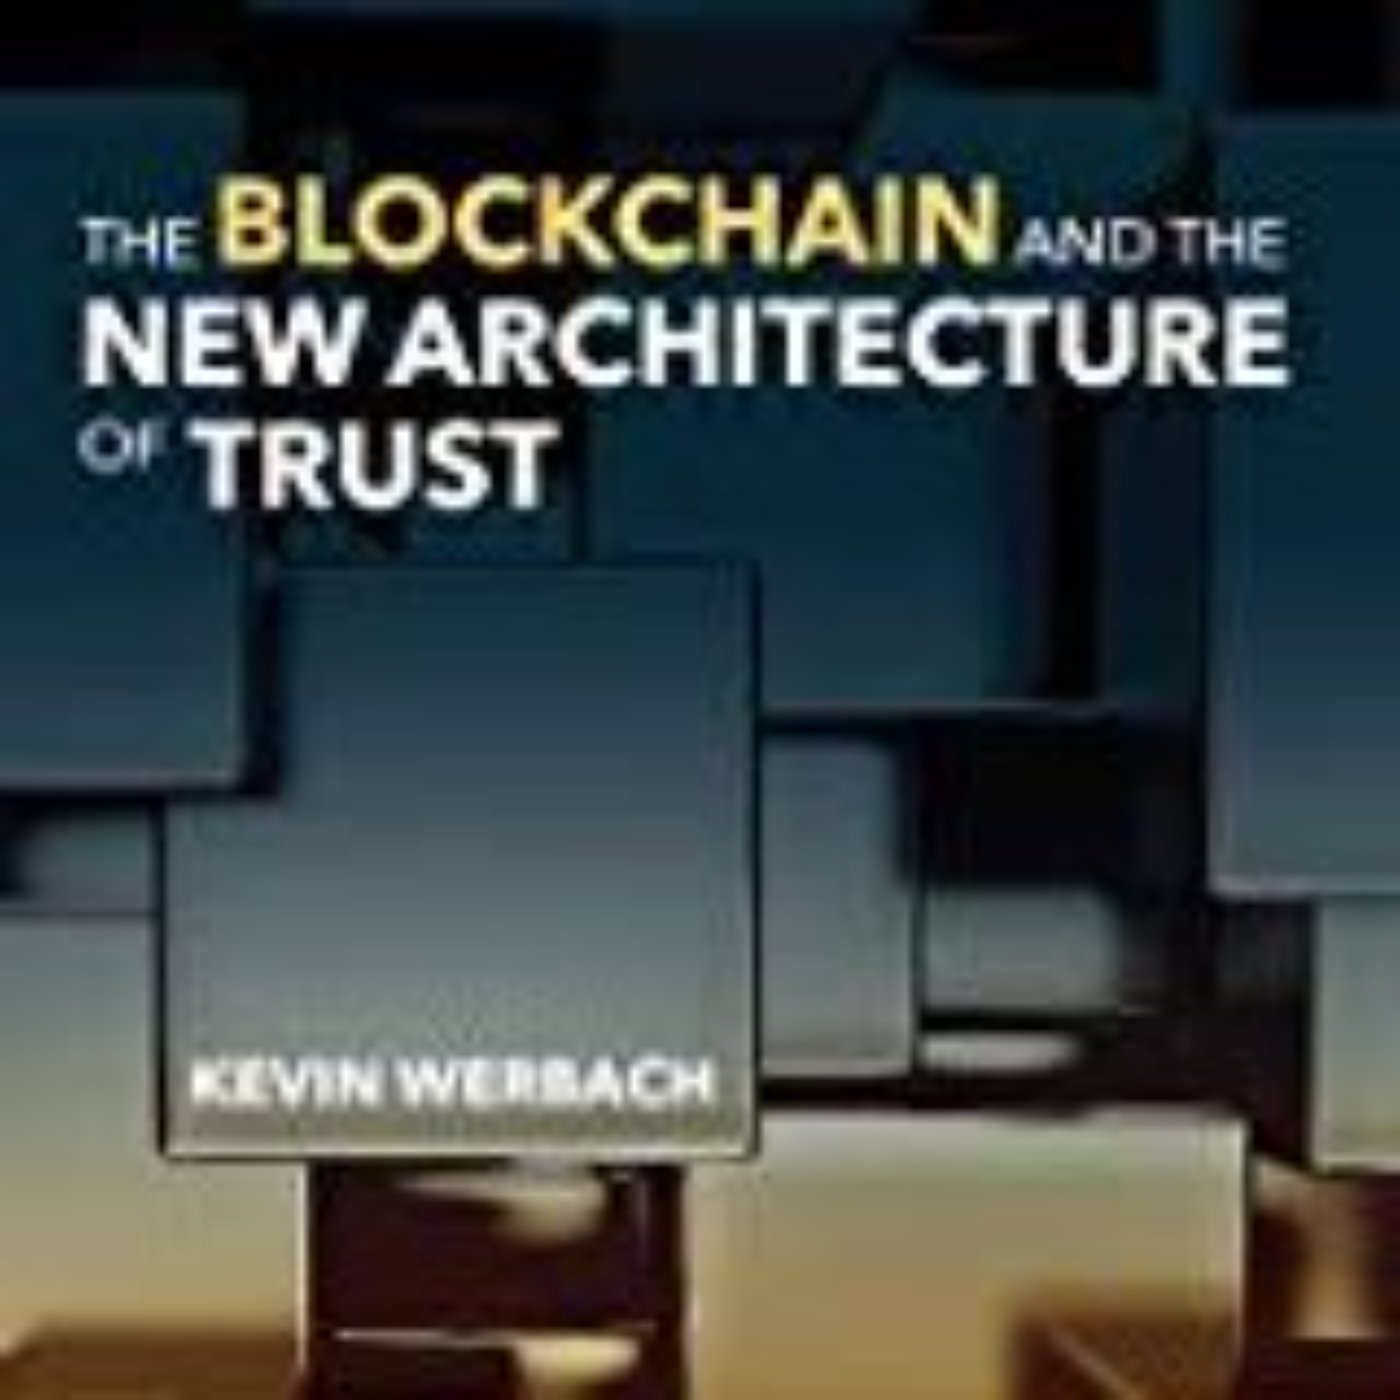 Kevin Werbach - The Blockchain and the New Architecture of Trust